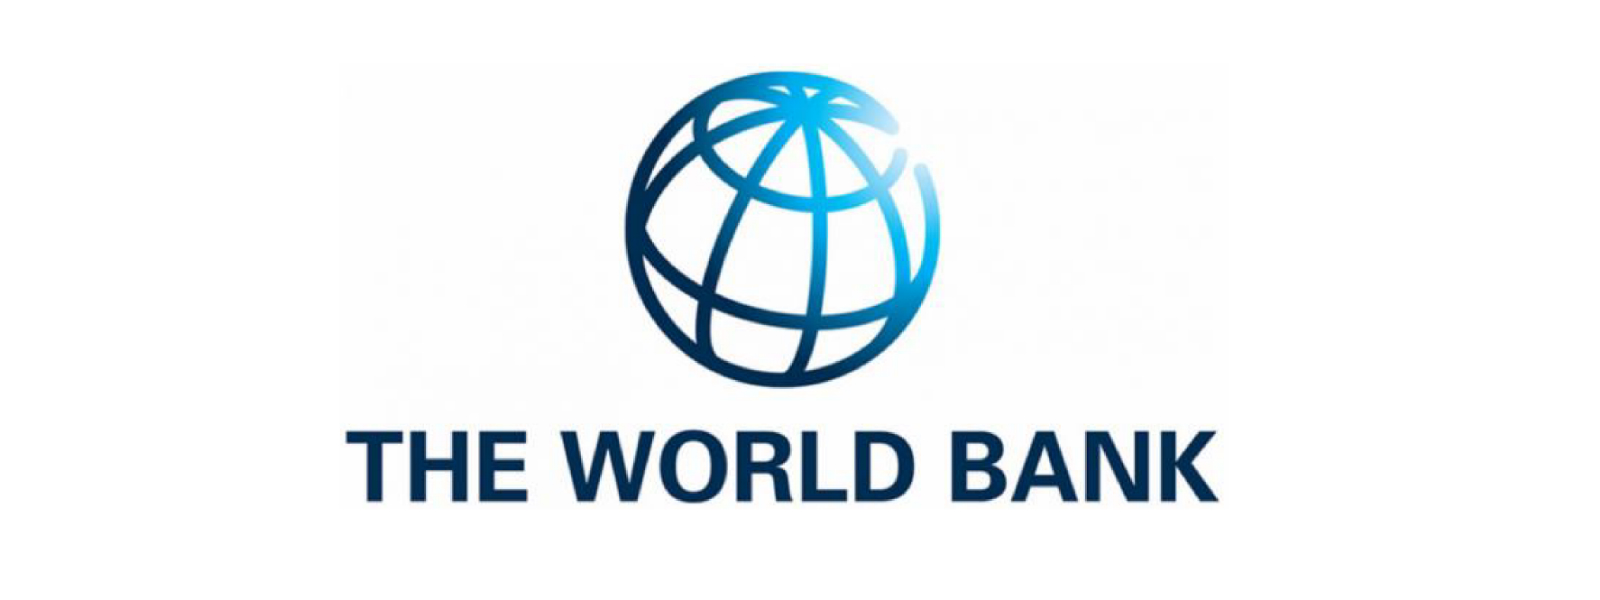 World Bank, IMF request all official bilateral creditors to suspend debt payments from developing nations